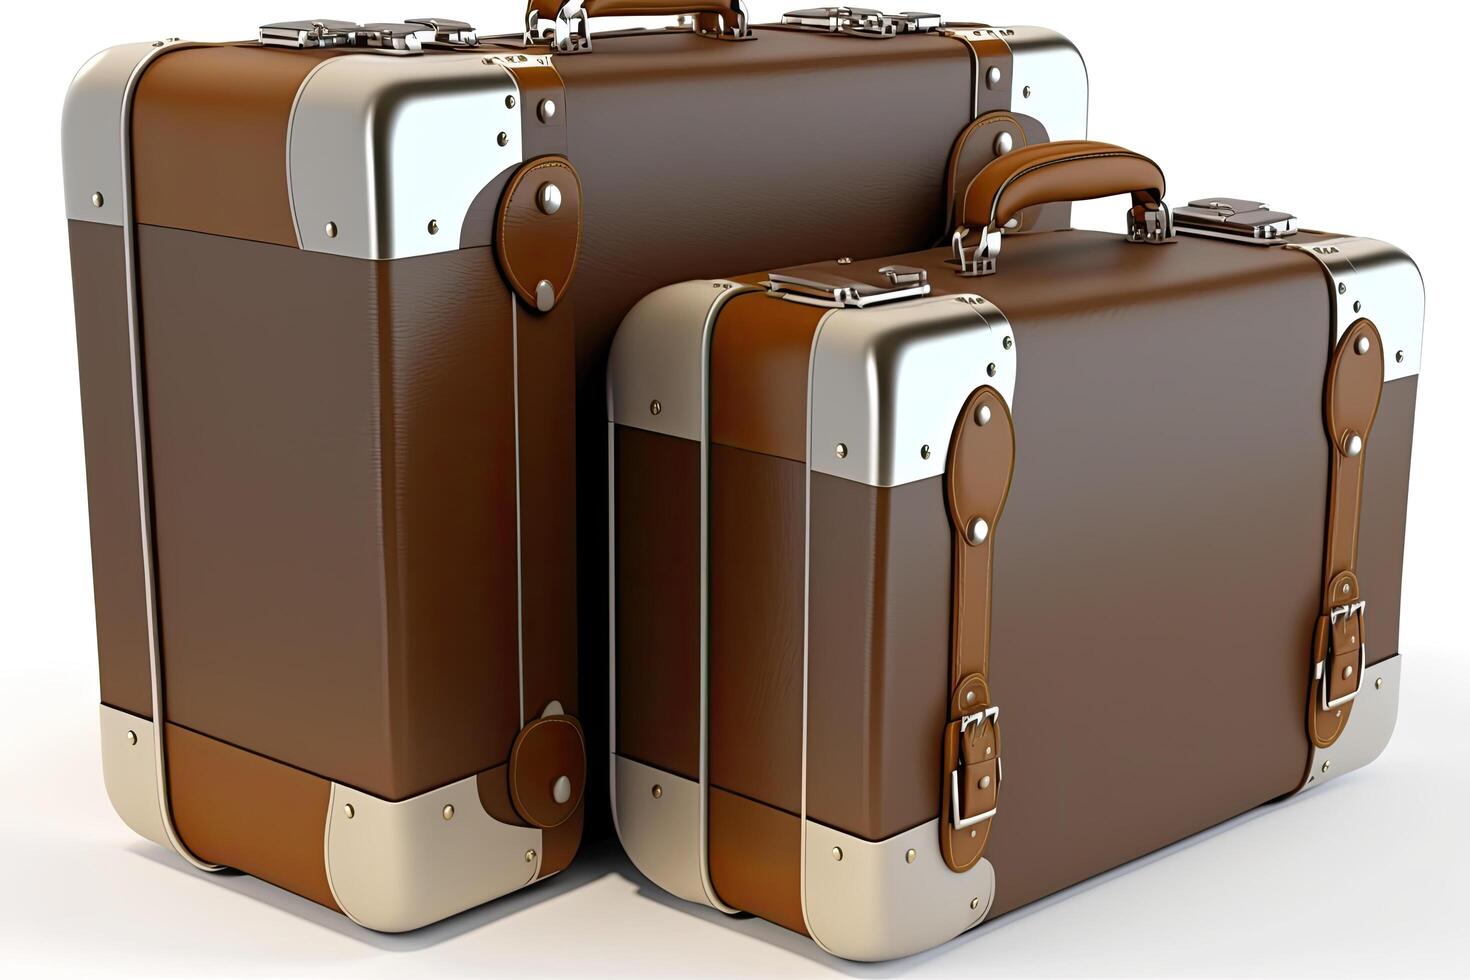 suitcases in airport. Illustration photo